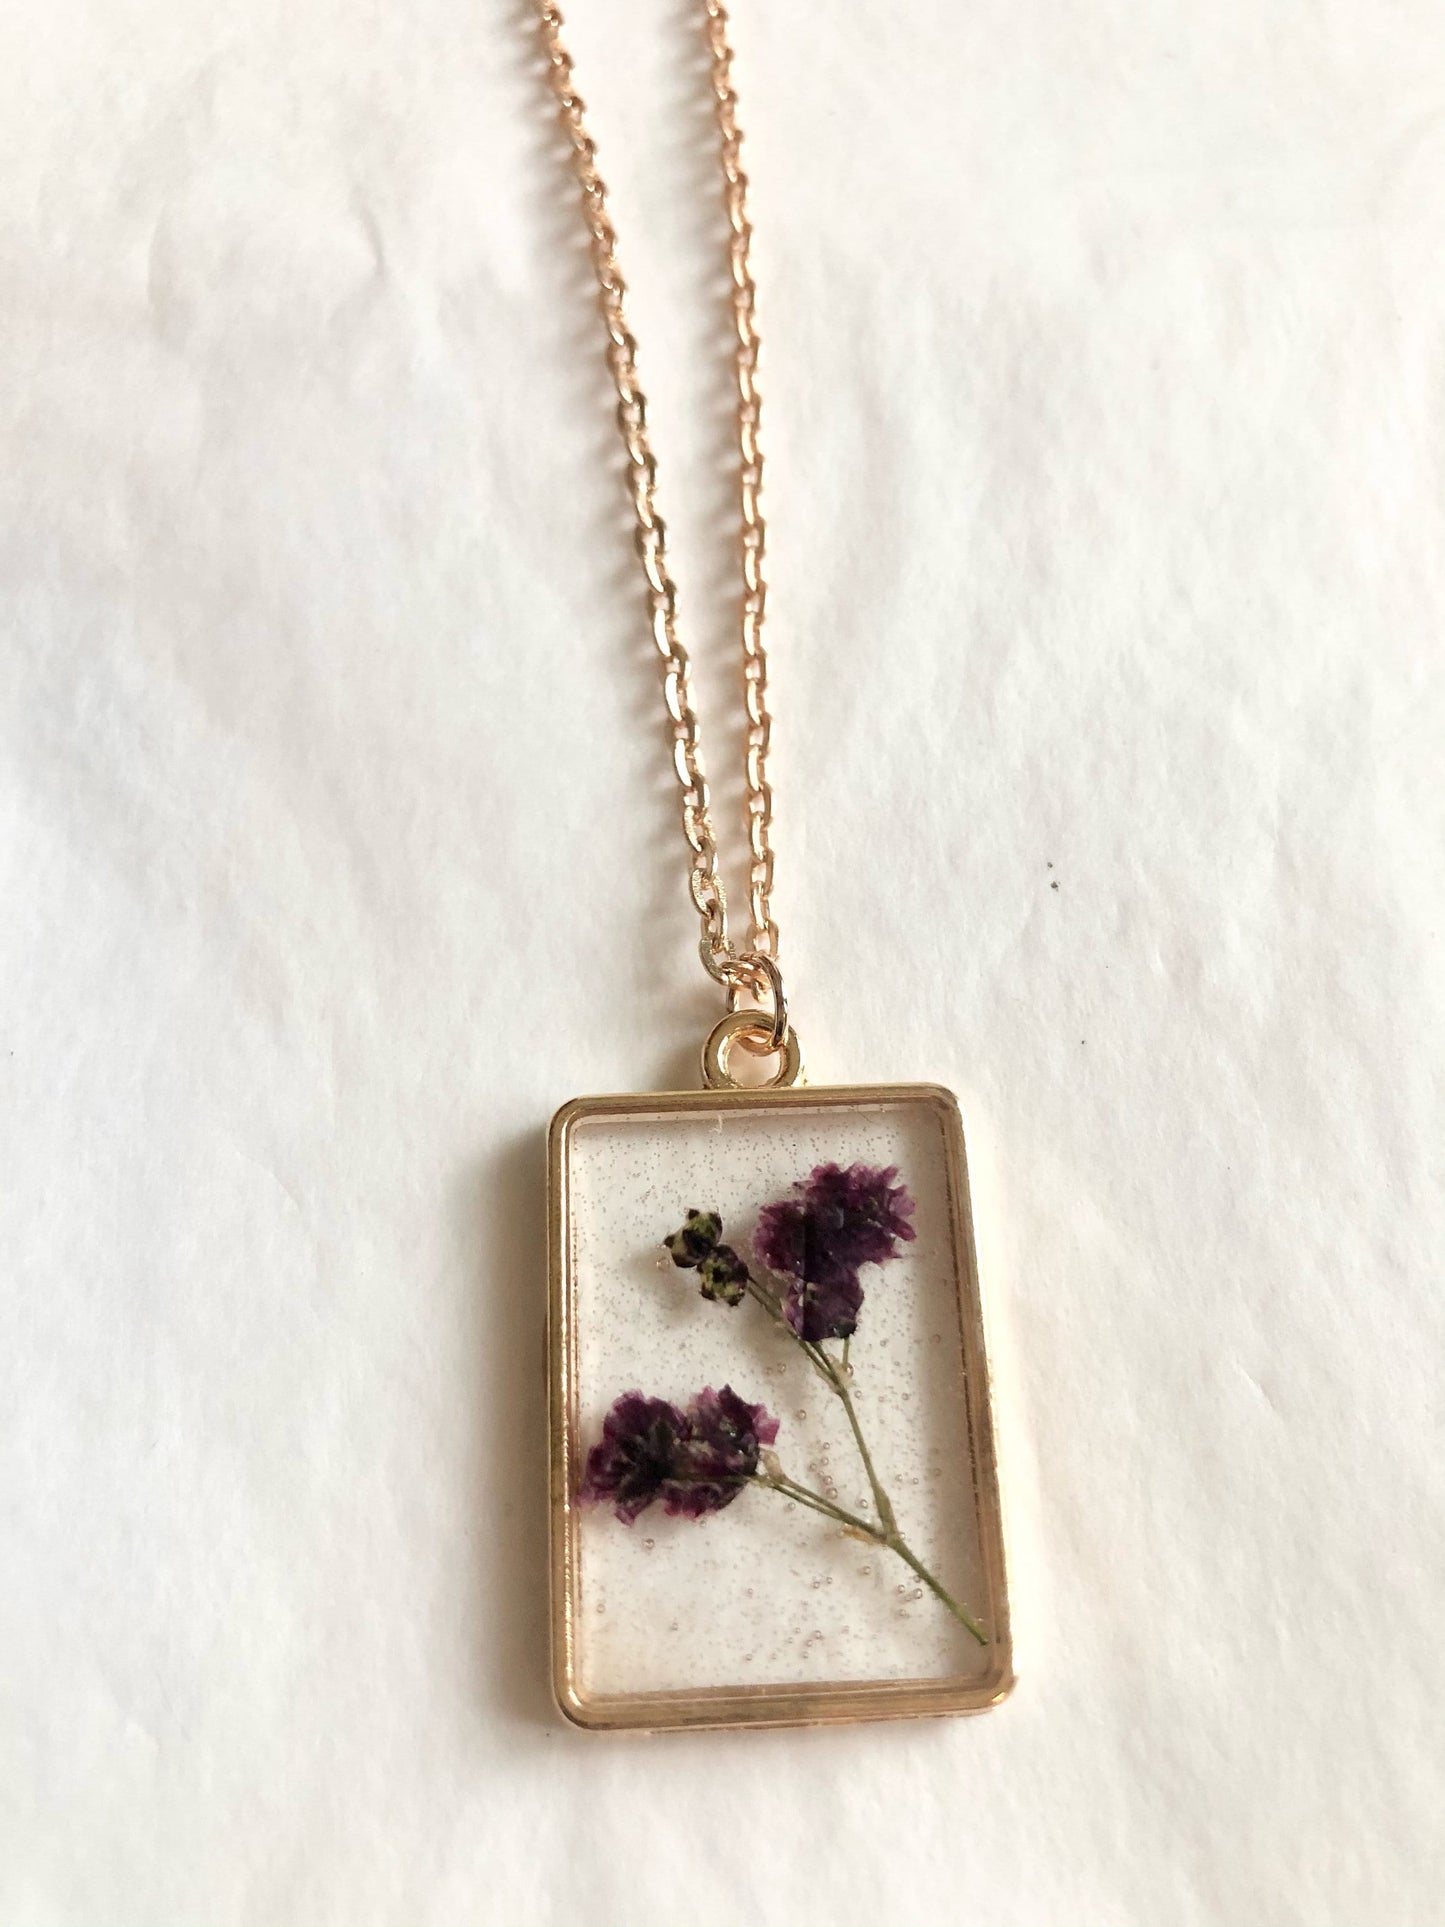 Real Dried Flowers and Resin Necklace, Small Gold Teardrop in Purples 14